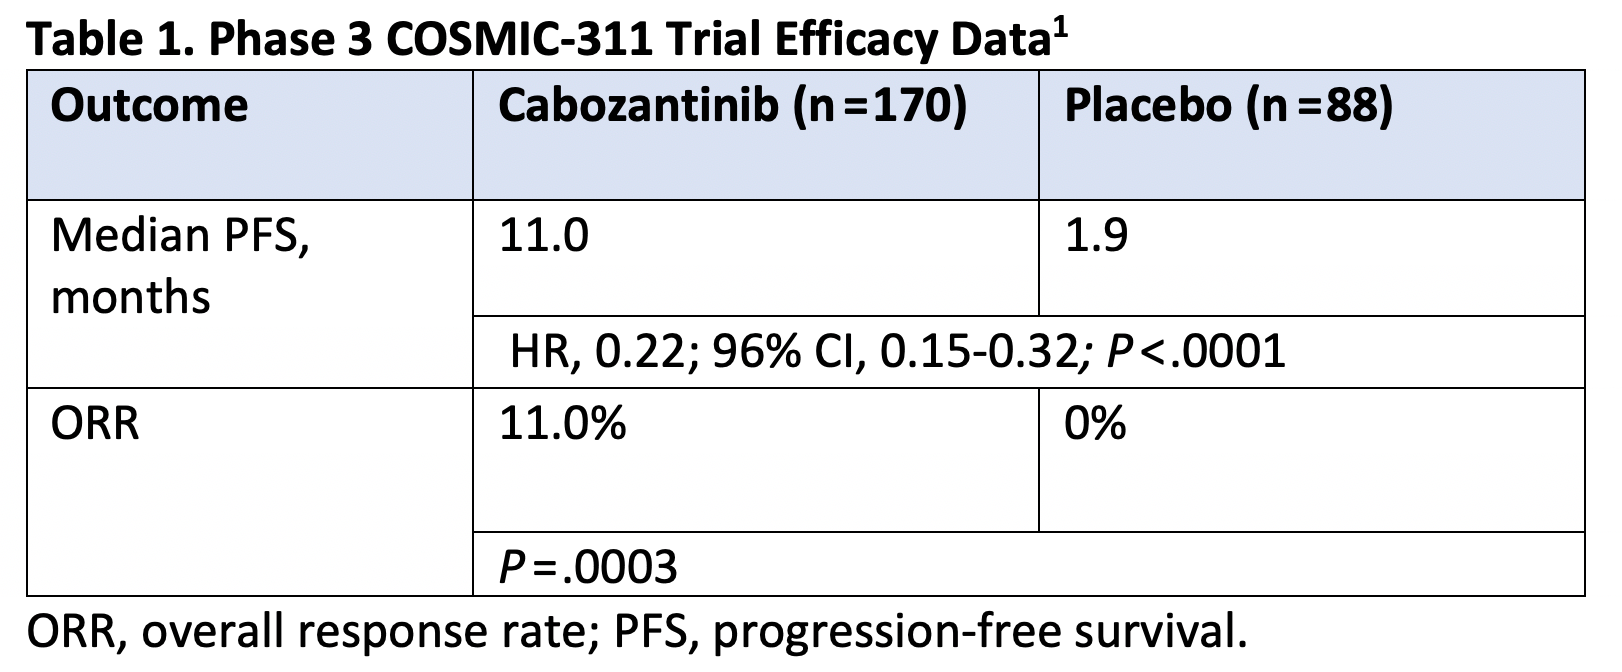 Table 1. Phase 3 COSMIC-311 Trial Efficacy Data